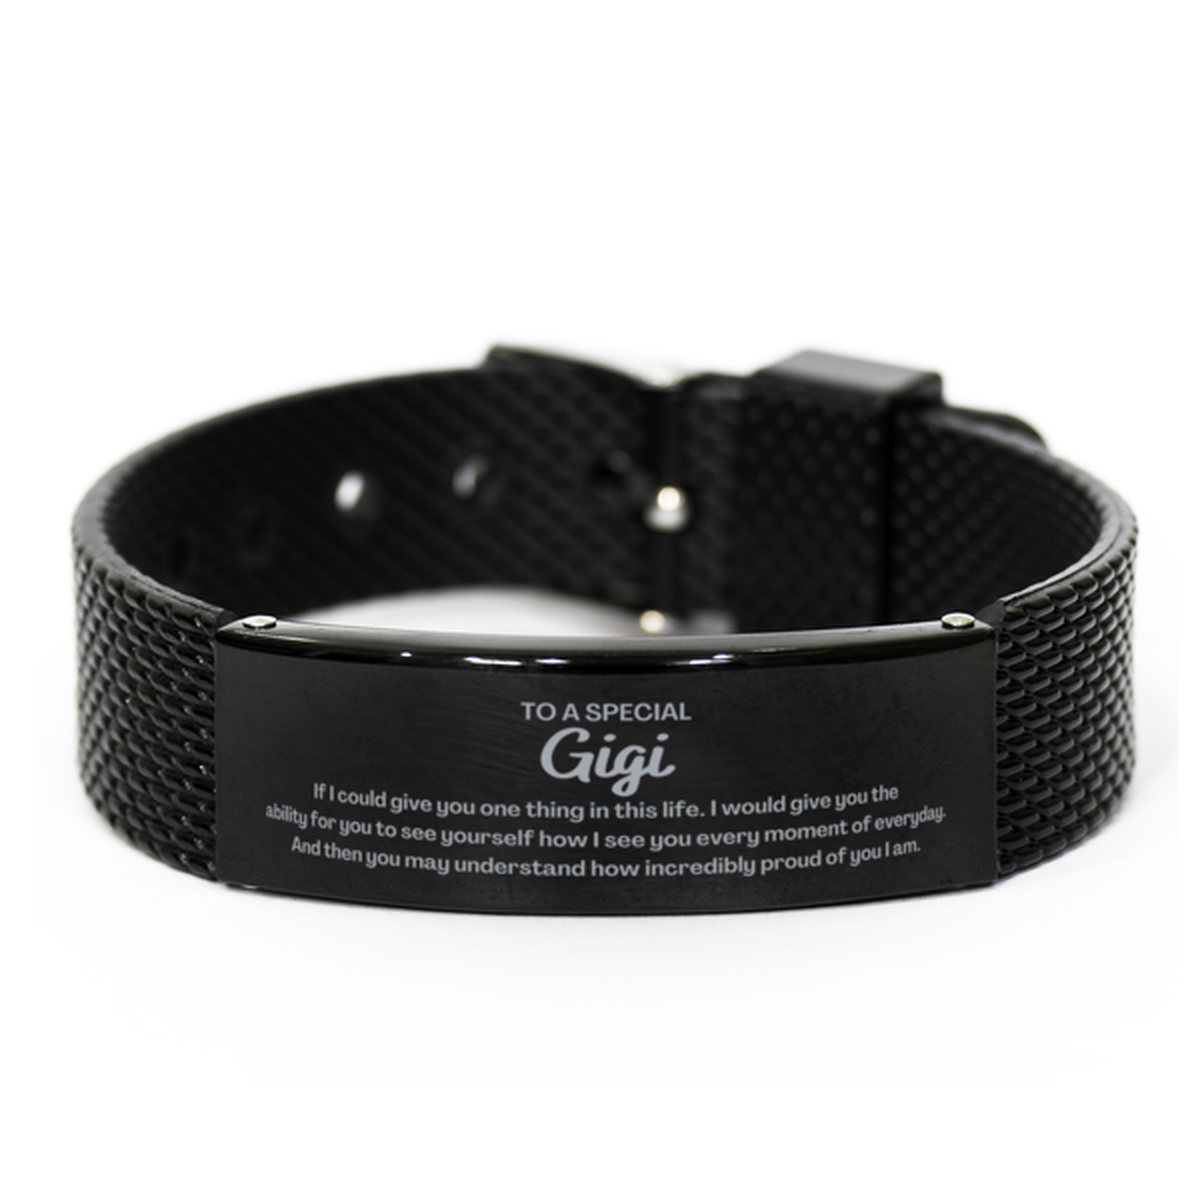 To My Gigi Black Shark Mesh Bracelet, Gifts For Gigi Engraved, Inspirational Gifts for Christmas Birthday, Epic Gifts for Gigi To A Special Gigi how incredibly proud of you I am